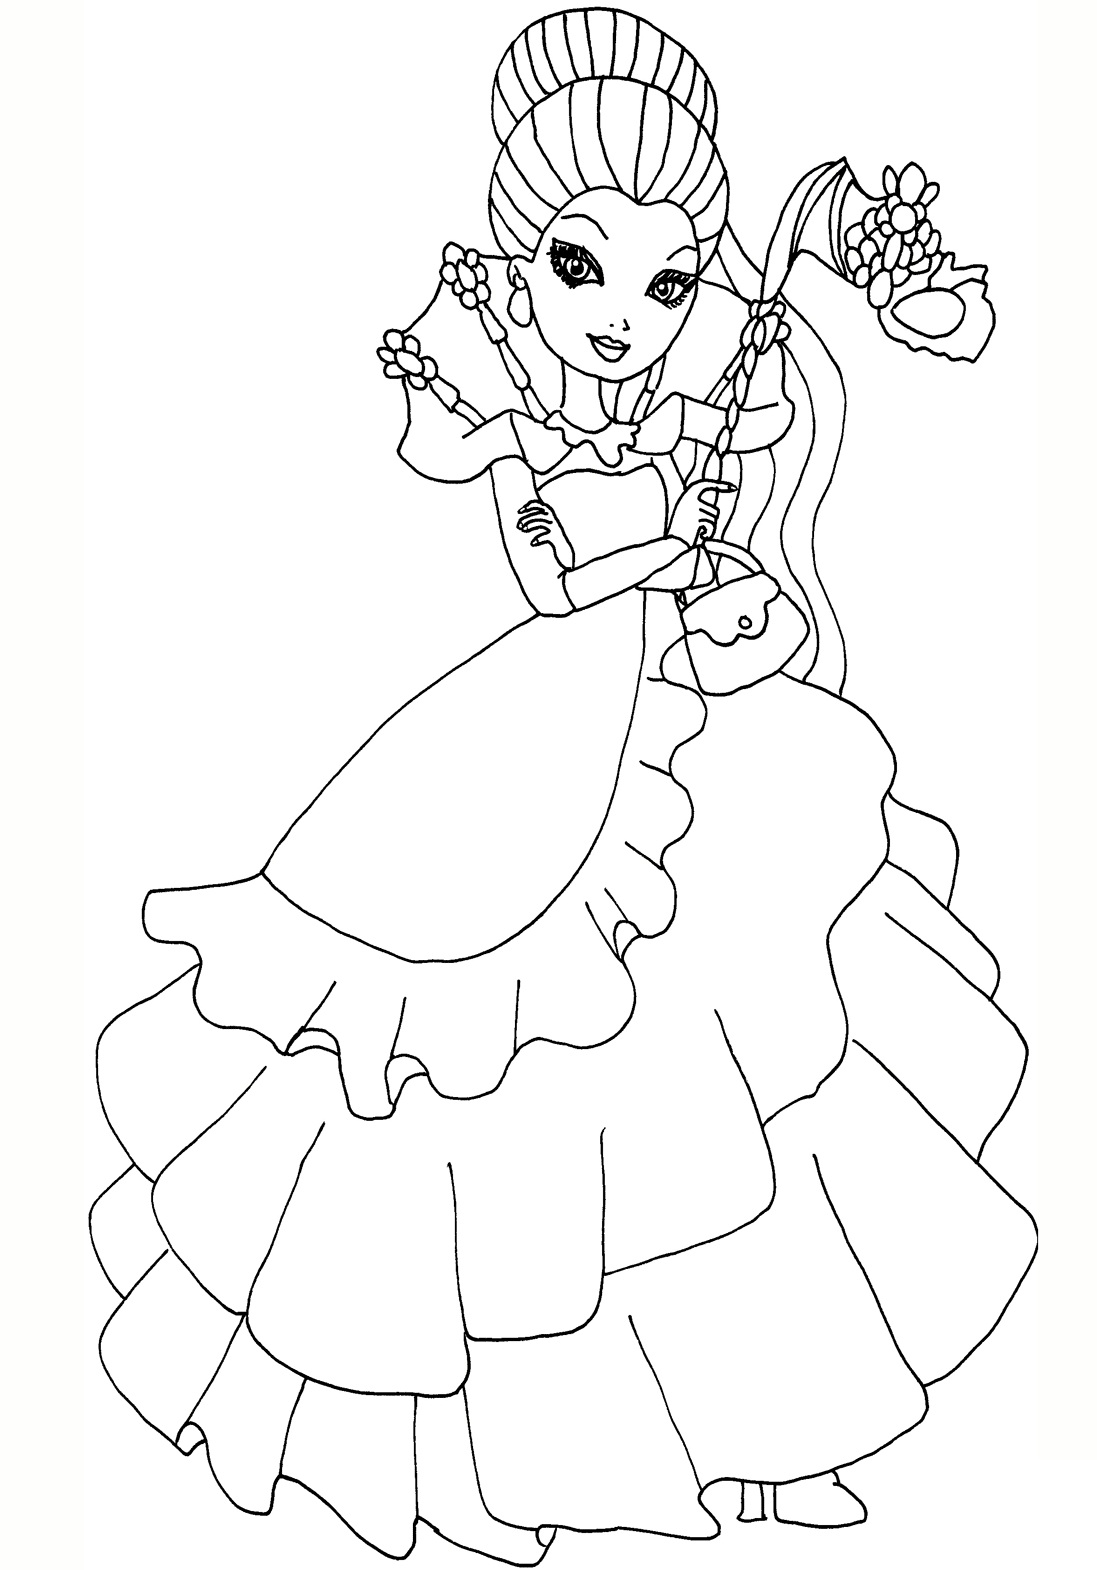 Thronecoming Raven Queen Coloring Page   Free Printable Coloring ...